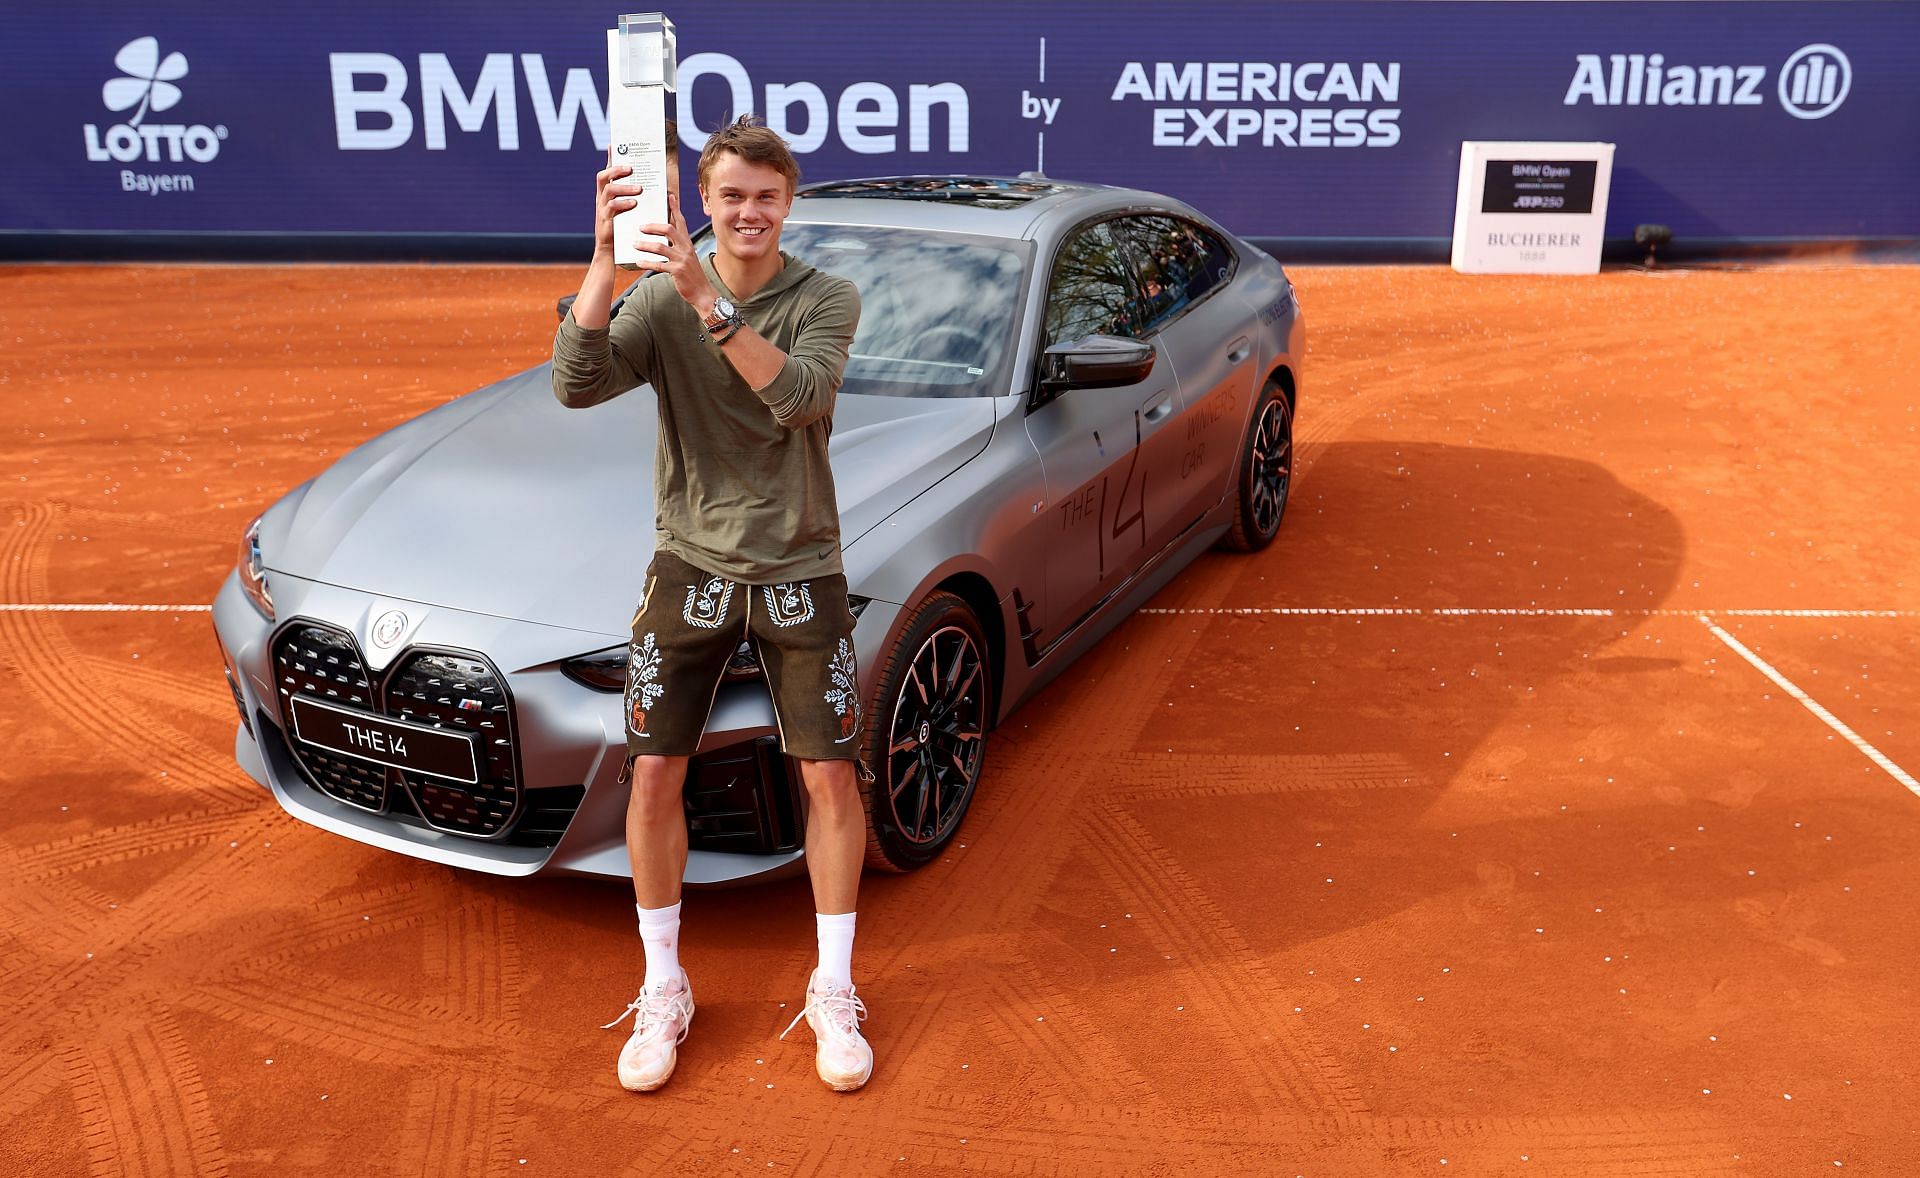 Holger Run successfully defended his title at the 2023 BMW Open.